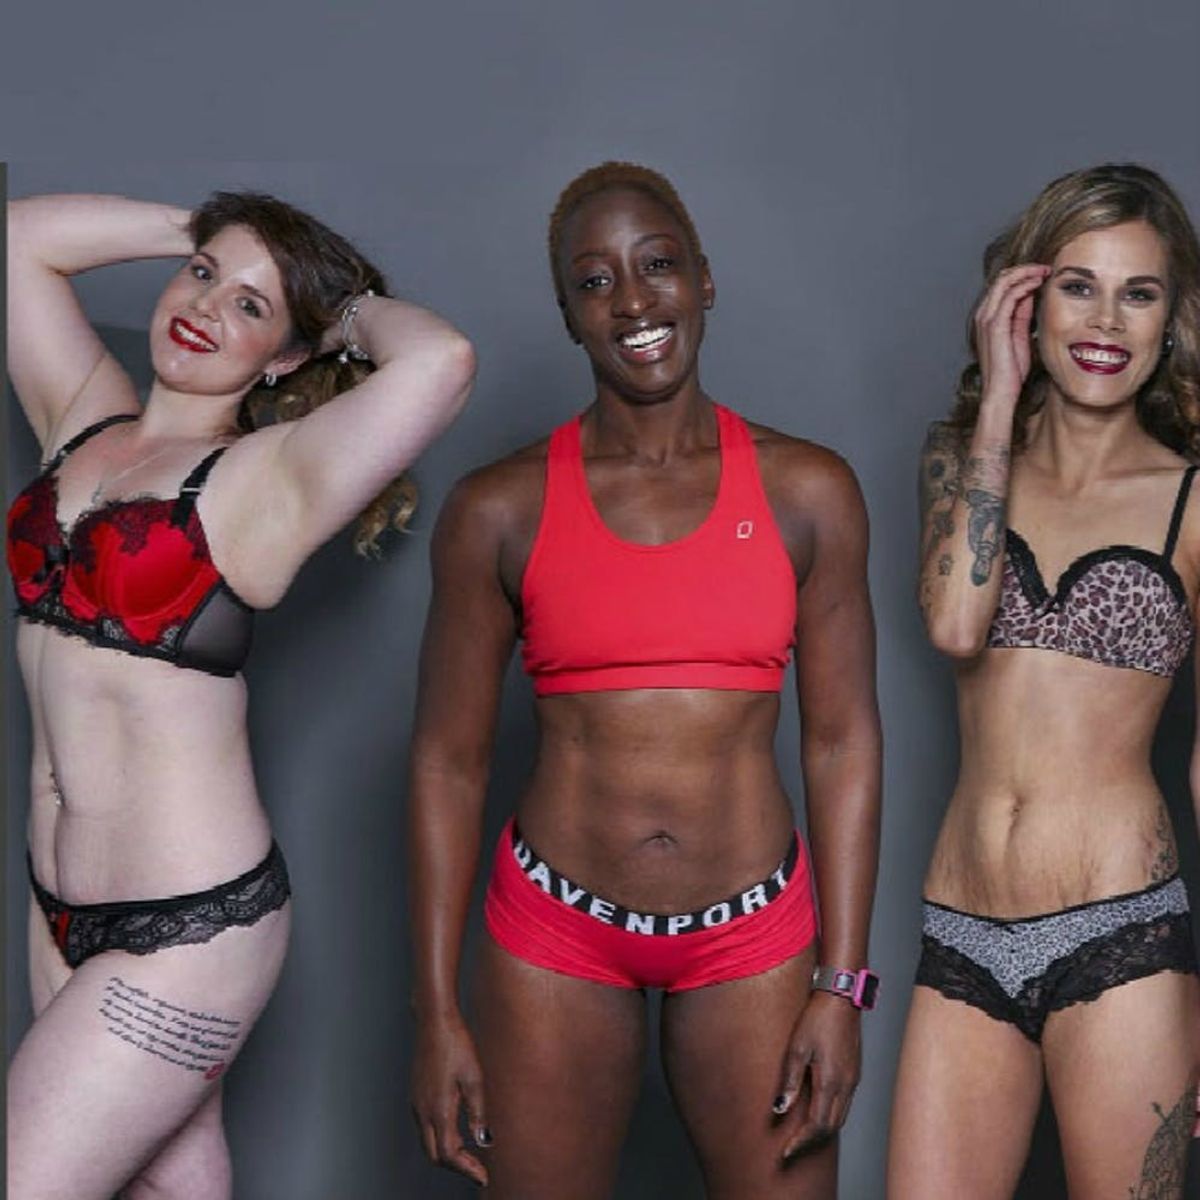 100 Women Stripped Down to Their Skivvies for This Seriously Inspiring Cause